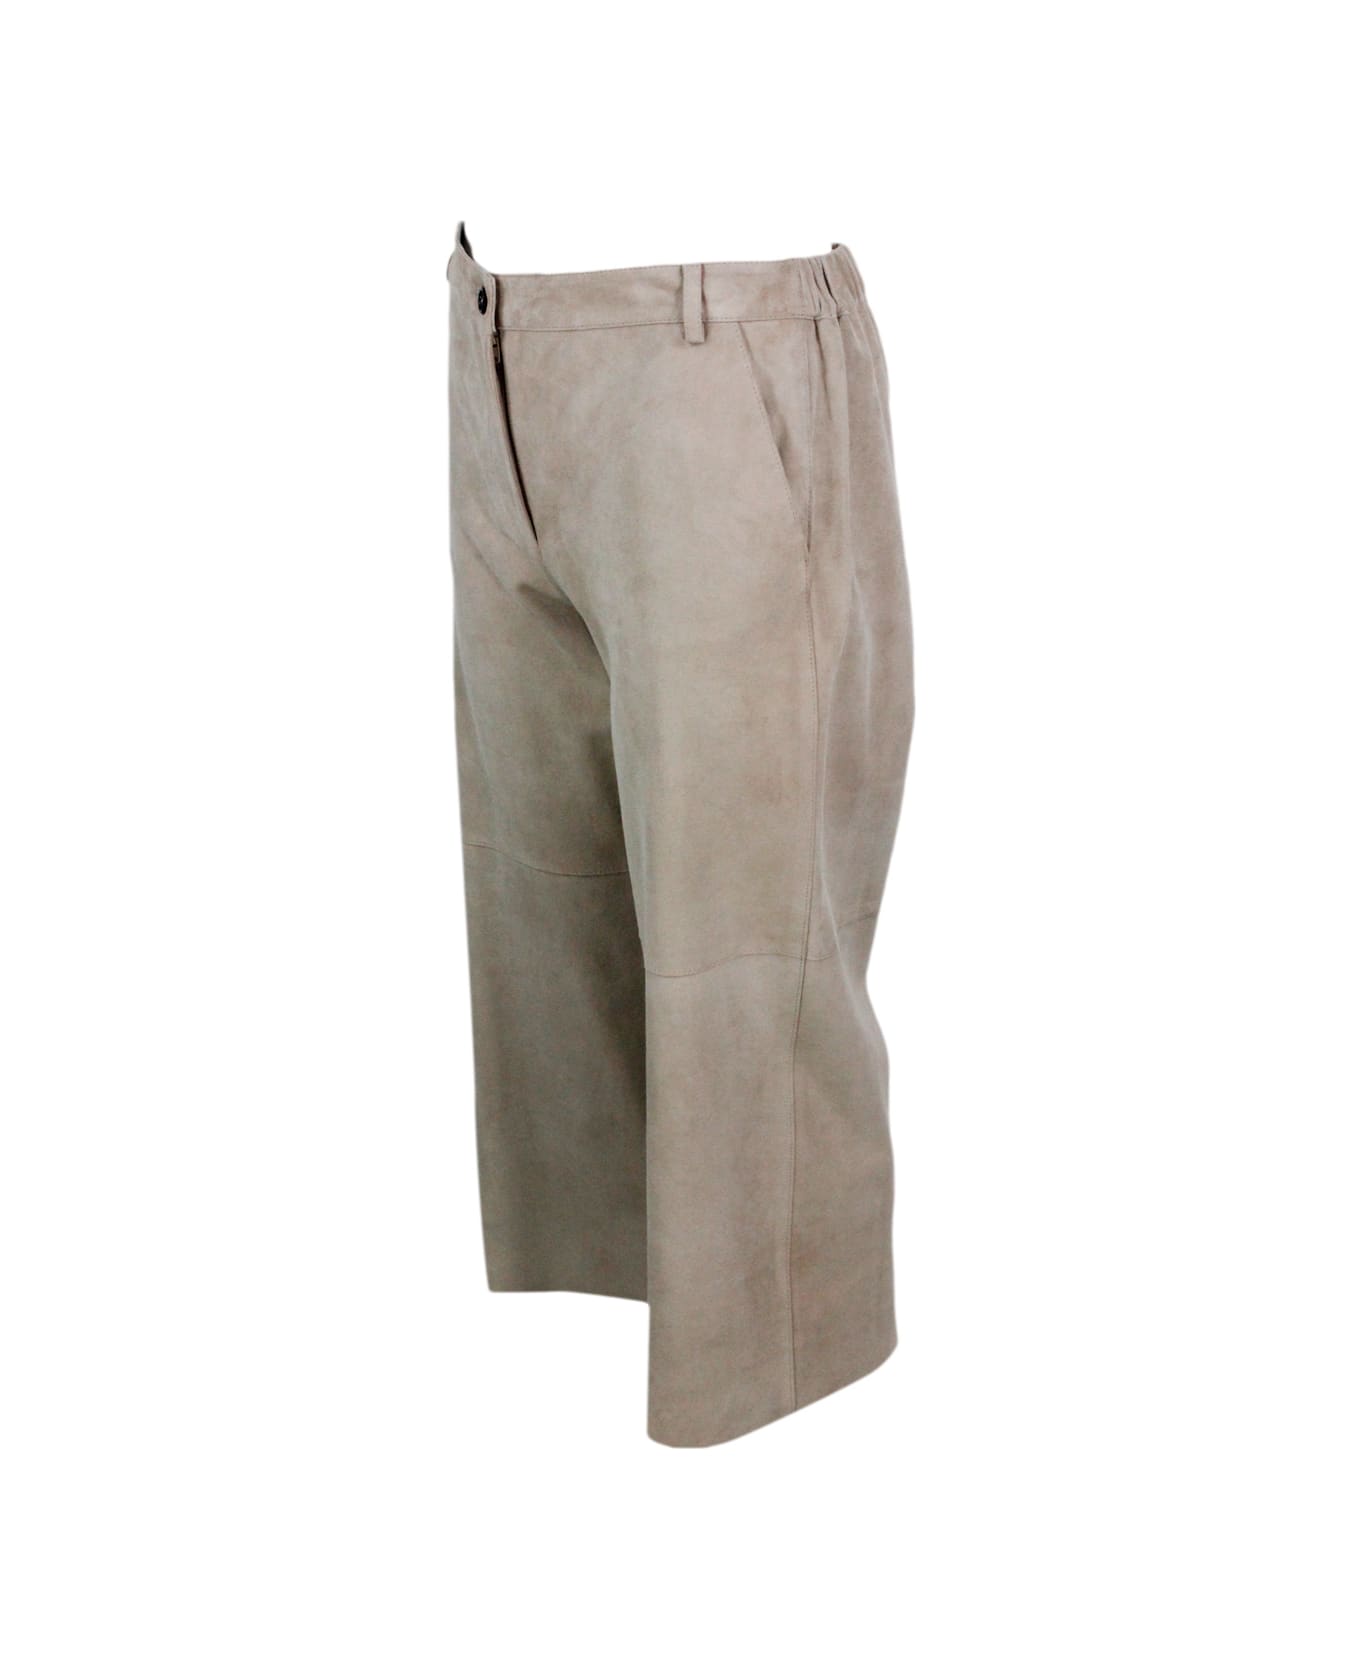 Antonelli Trousers Made Of Soft Suede, With A Soft Fit And Zip And Button Closure With Elastic Waist On The Back. Welt Pockets. - Beige